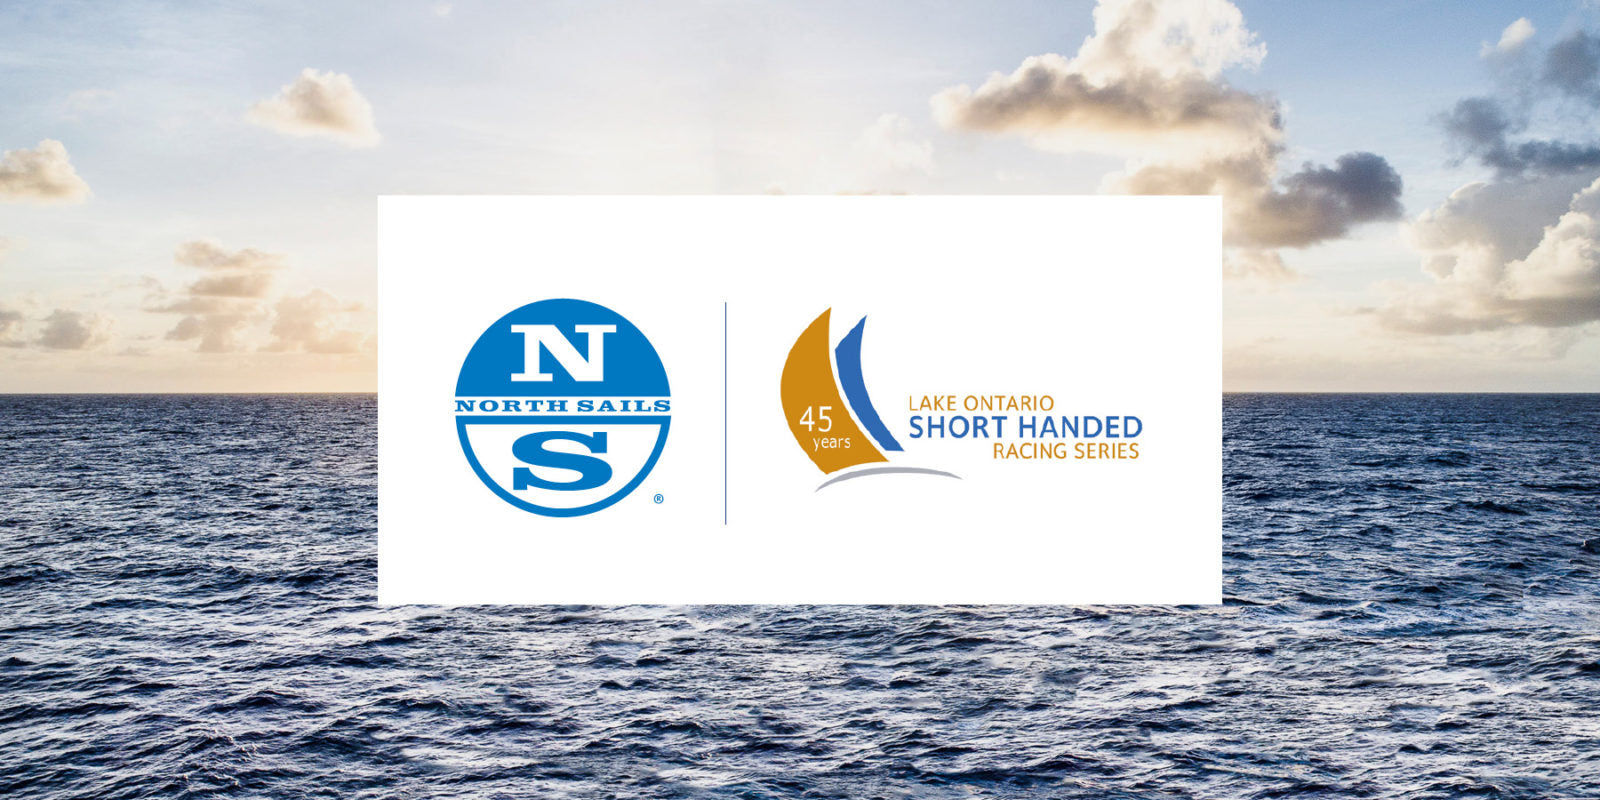 NORTH SAILS PARTNERS WITH ACCESS ABILITIES